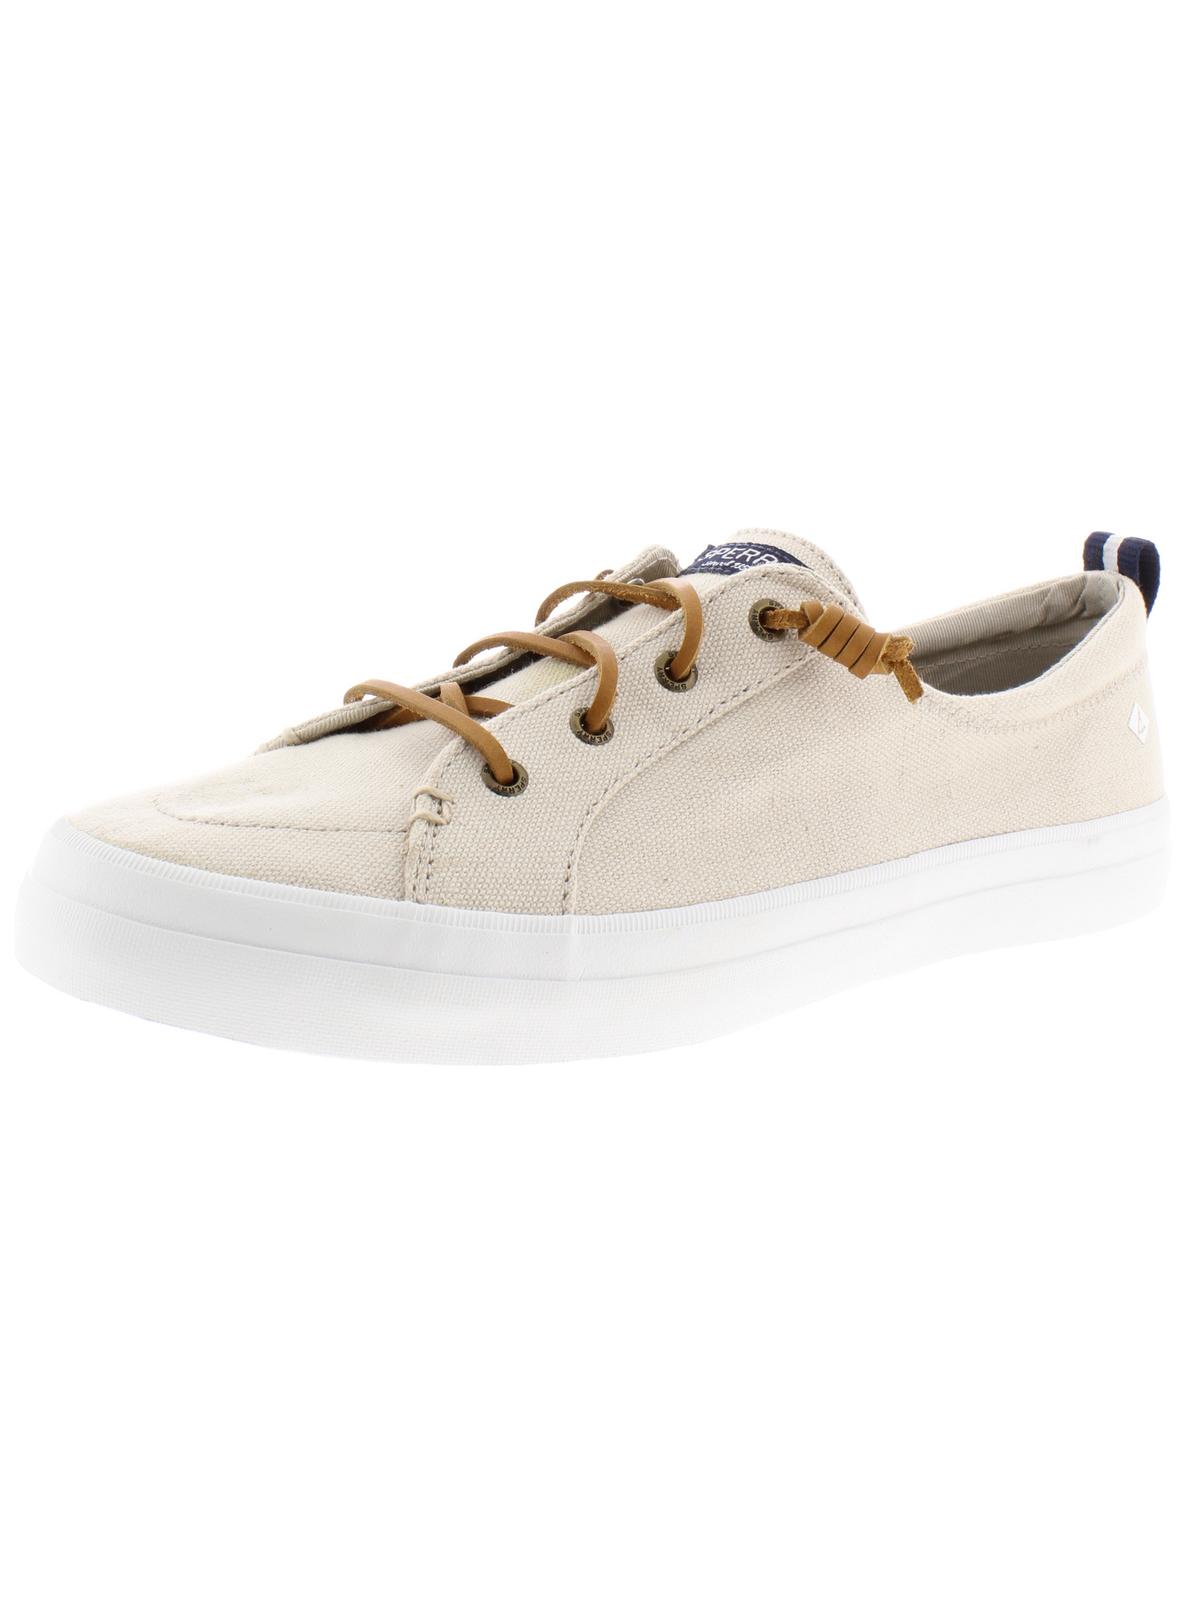 SPERRY Crest Vibe Womens Canvas Casual Slip-On Sneakers